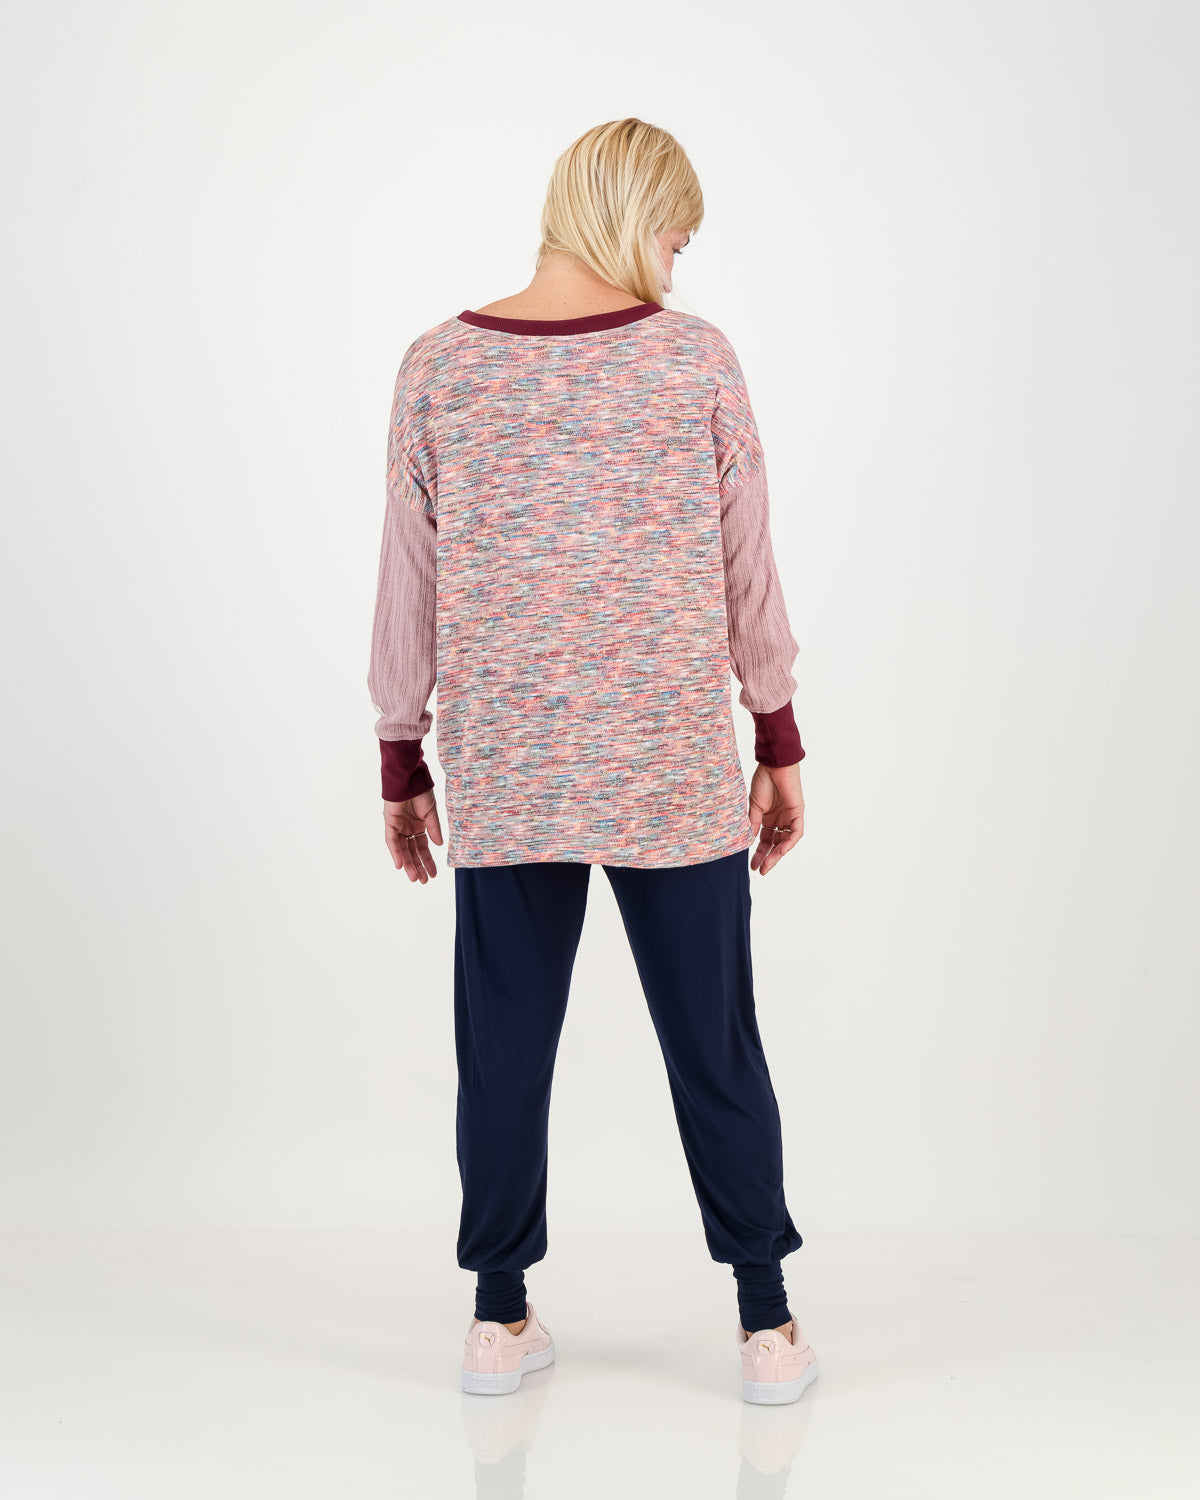 back view of Carefree casual lavender Jersey, boxy shape with longer back, paired with navy comfy pants